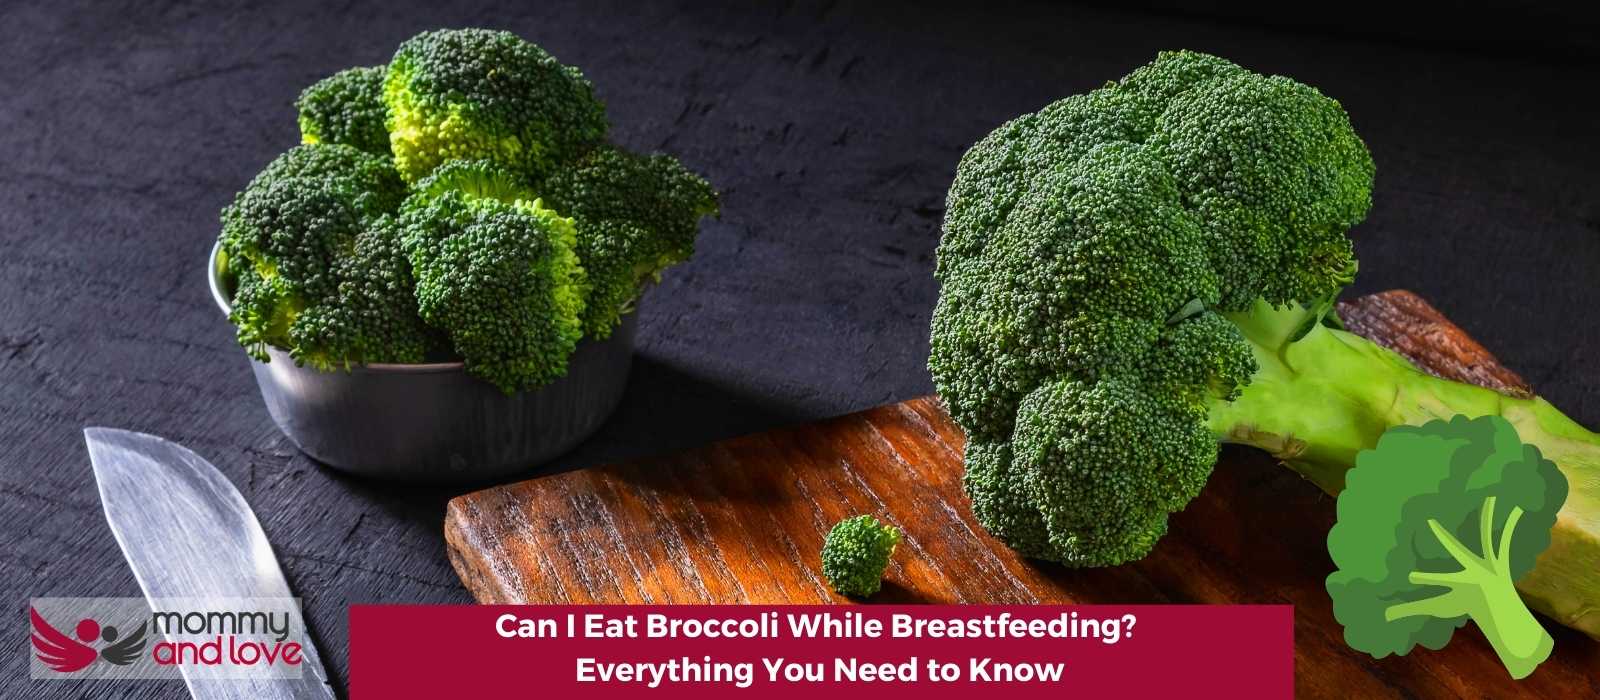 Can I Eat Broccoli While Breastfeeding Everything You Need to Know